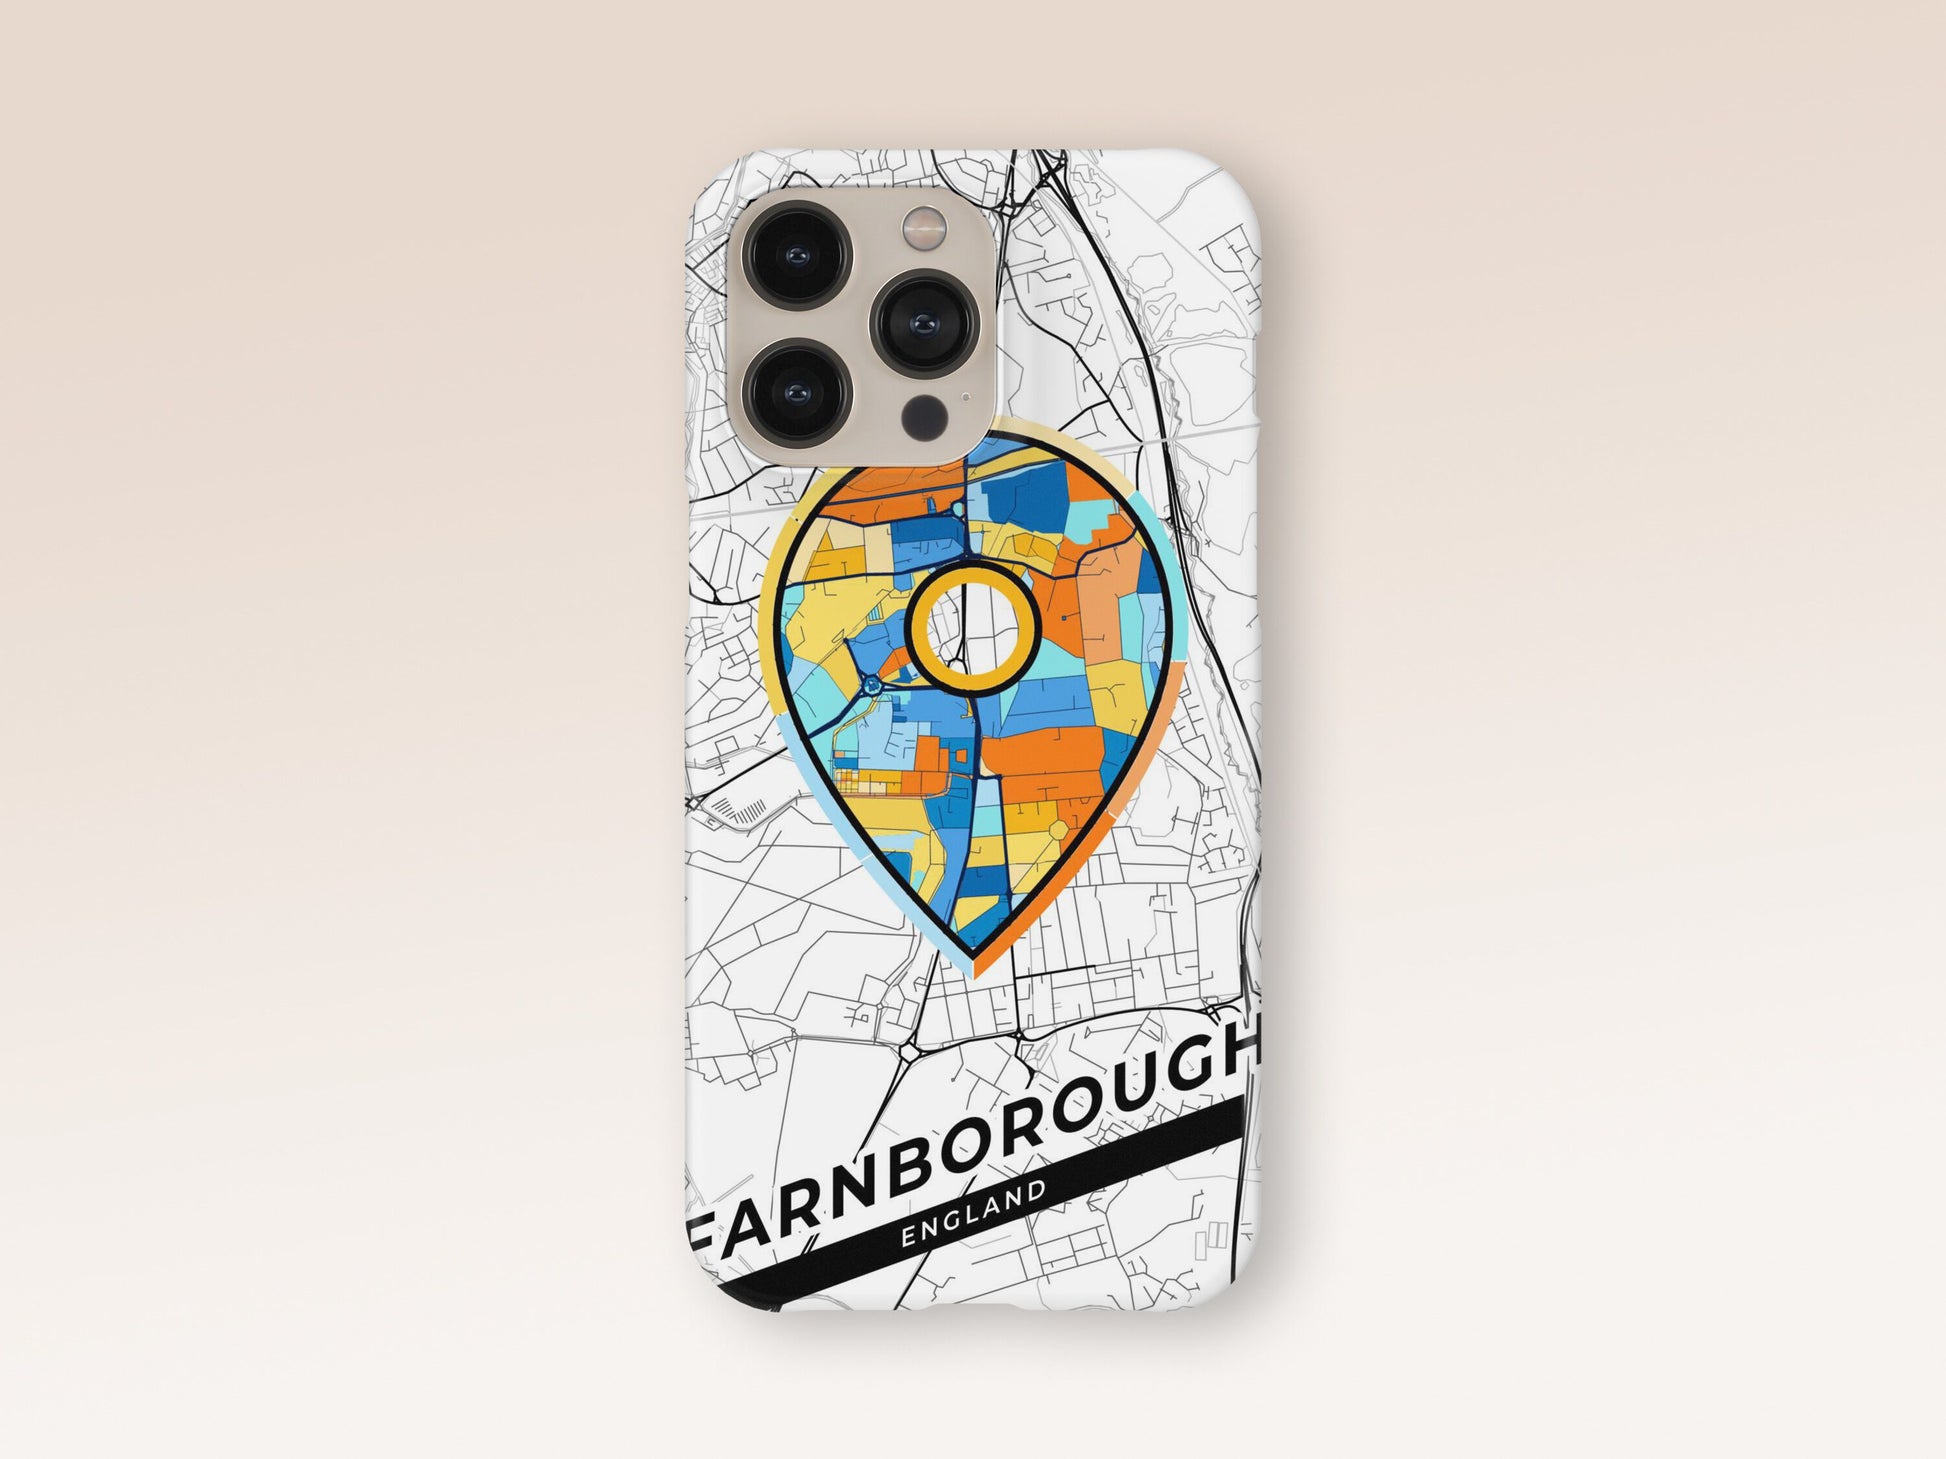 Farnborough England slim phone case with colorful icon. Birthday, wedding or housewarming gift. Couple match cases. 1